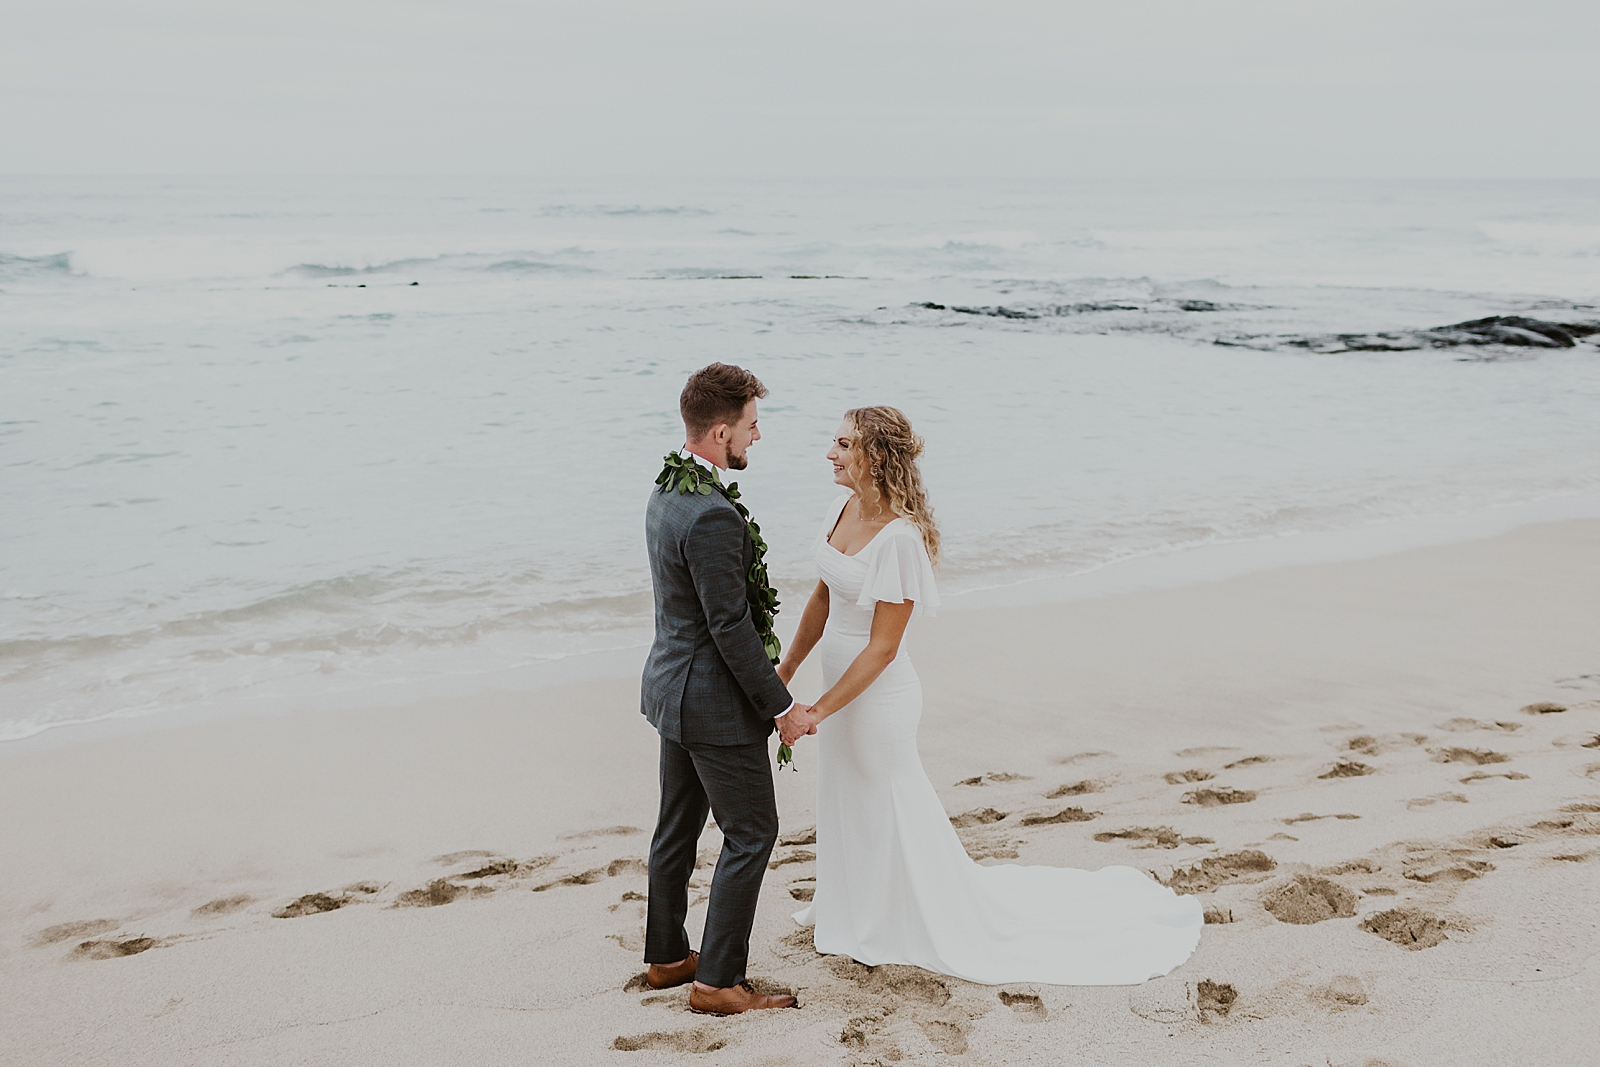 Bride and Groom holding hands on the beach by the ocean